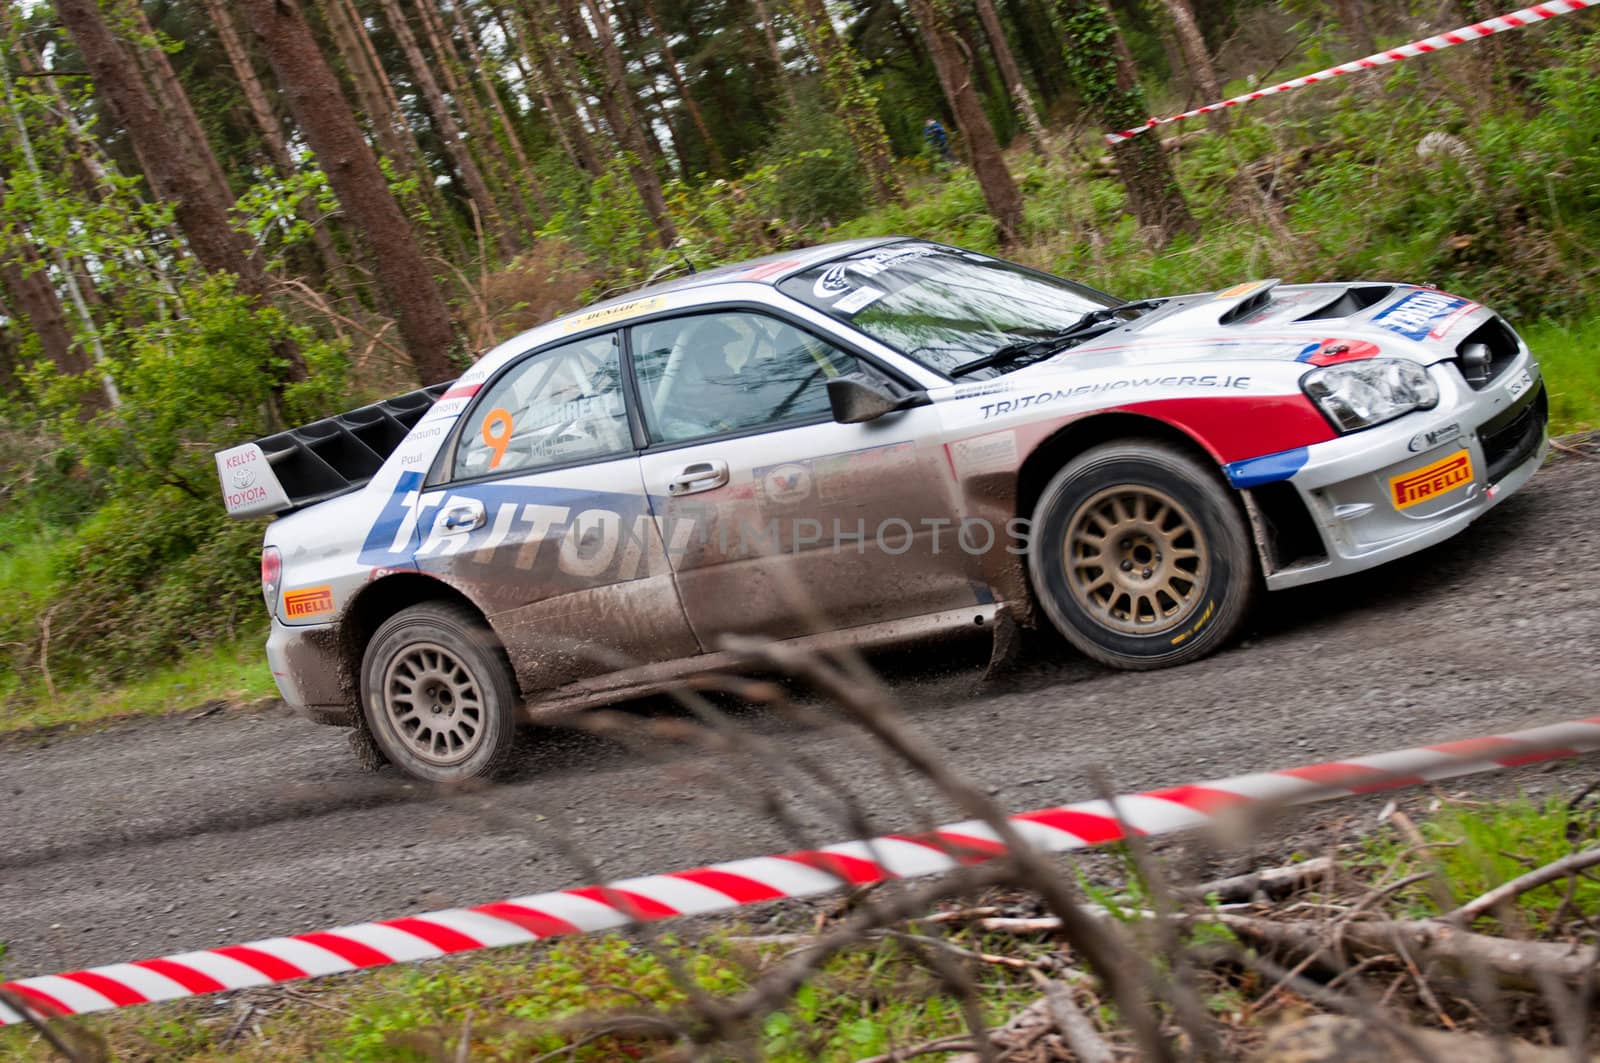 MALLOW, IRELAND - MAY 19: K. Barrett driving Subaru Impreza at the Jim Walsh Cork Forest Rally on May 19, 2012 in Mallow, Ireland. 4th round of the Valvoline National Forest Rally Championship.